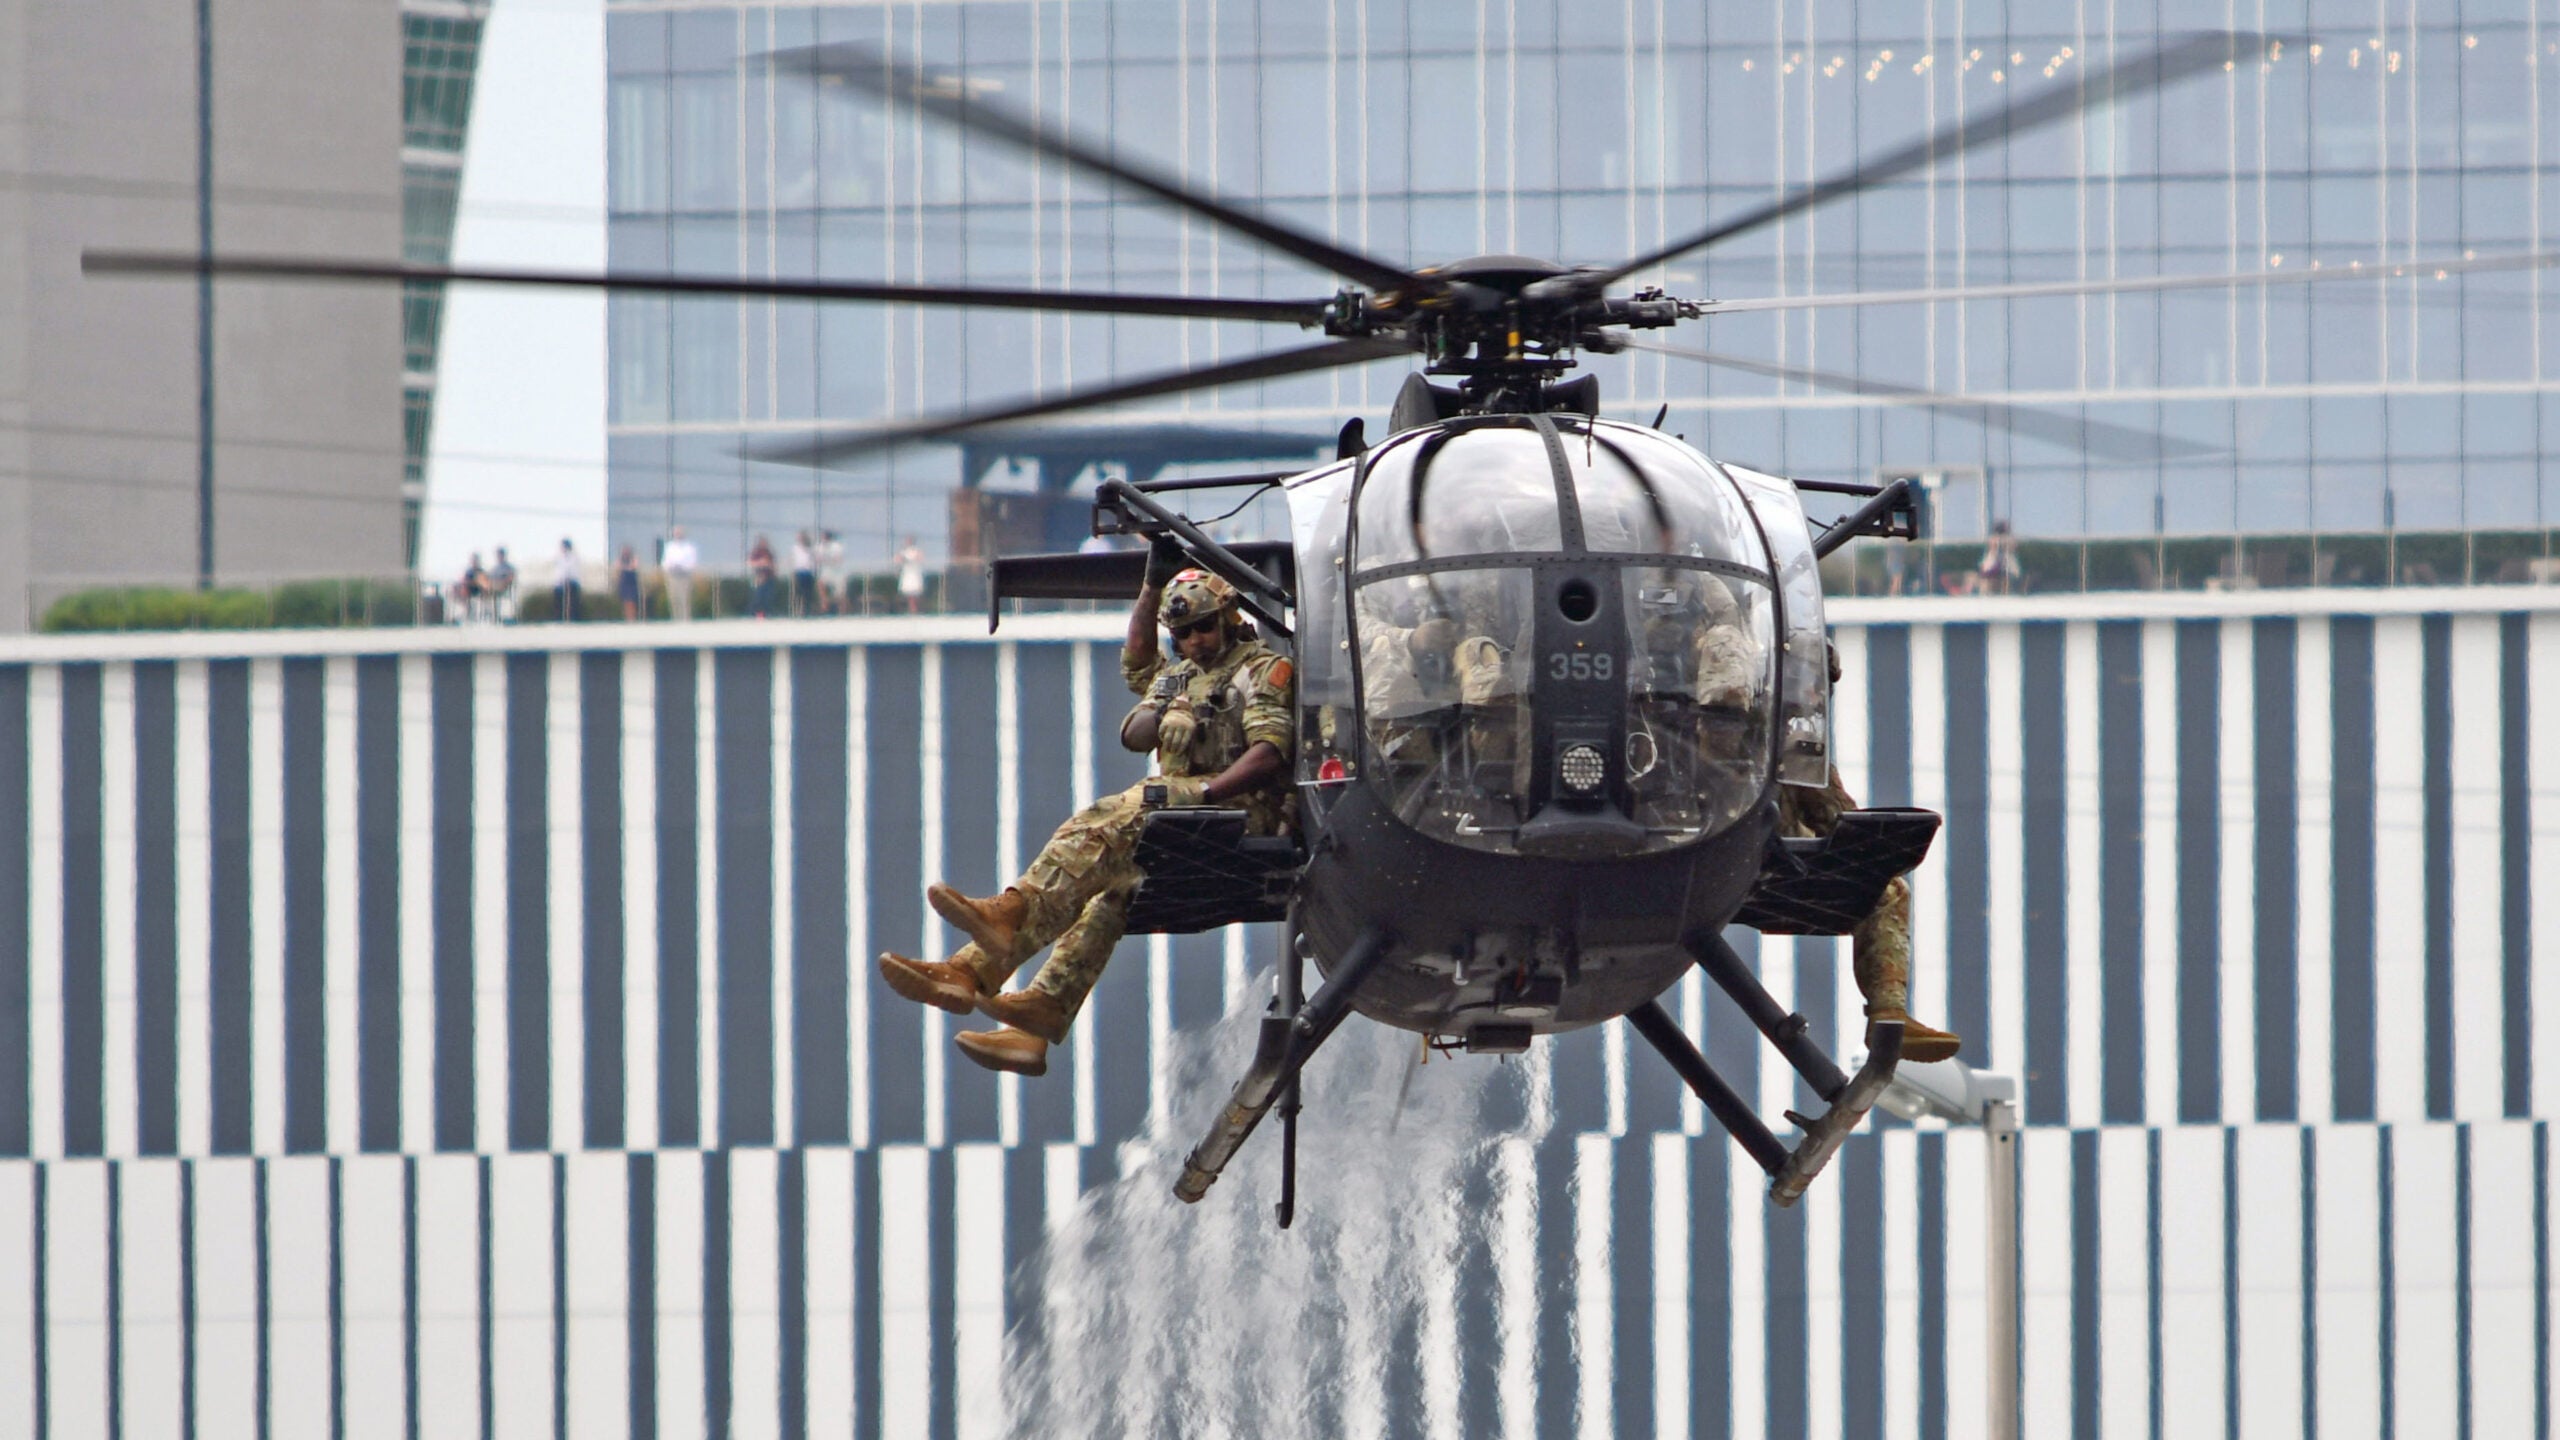 Members of the 5th Special Forces Group (Airborne) and the 160th SOAR deliver the Big Machine Grand Prix trophy in Nashville, Tennessee on August 6th, 2021. Team members also set up a static display showing off some of the tools of their trade and answered questions from curious race goers.